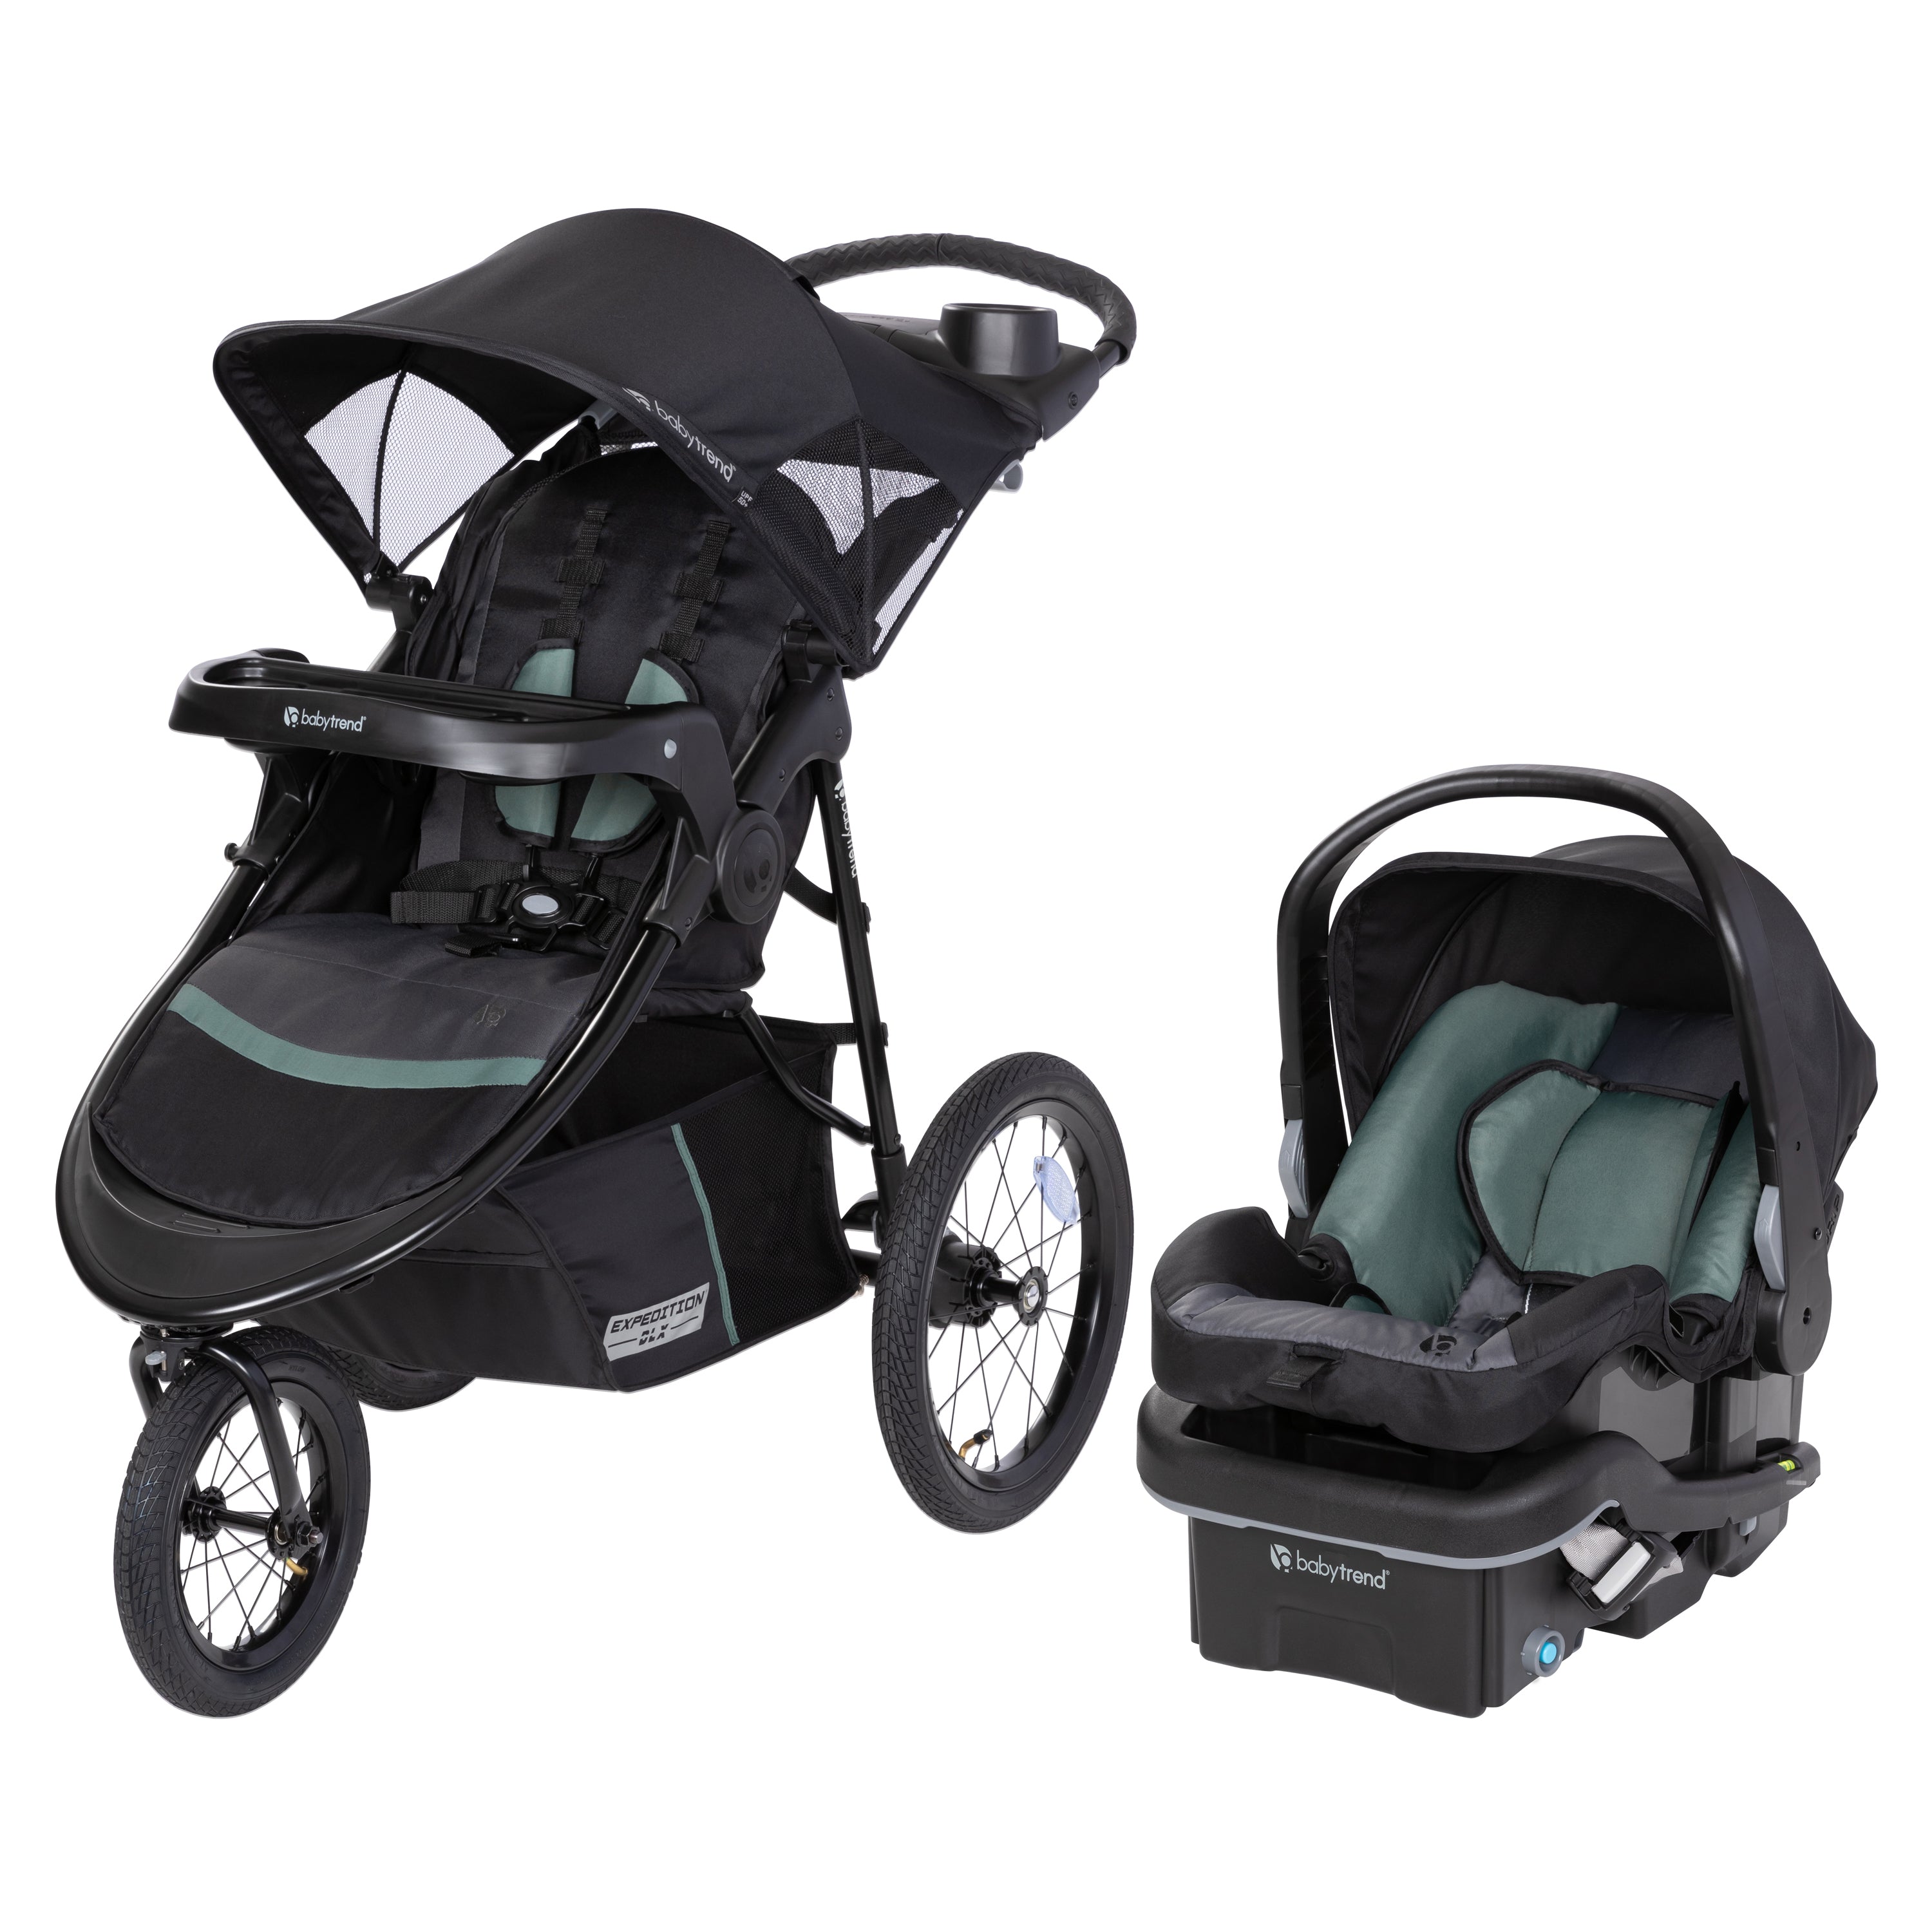 Baby Trend Expedition DLX Jogger Stroller Travel System with EZ-Lift 35 PLUS Infant Car Seat